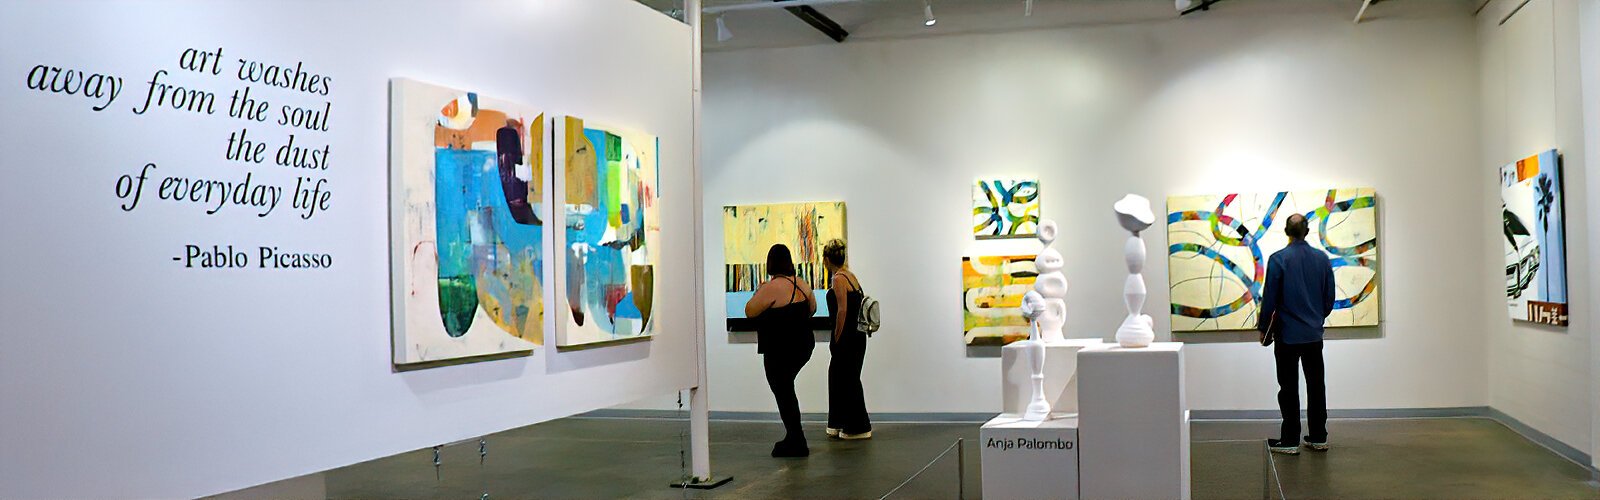 Visitors admire artwork at the Soft Water Gallery on the ArtsXchange campus during the Second Saturday ArtWalk.